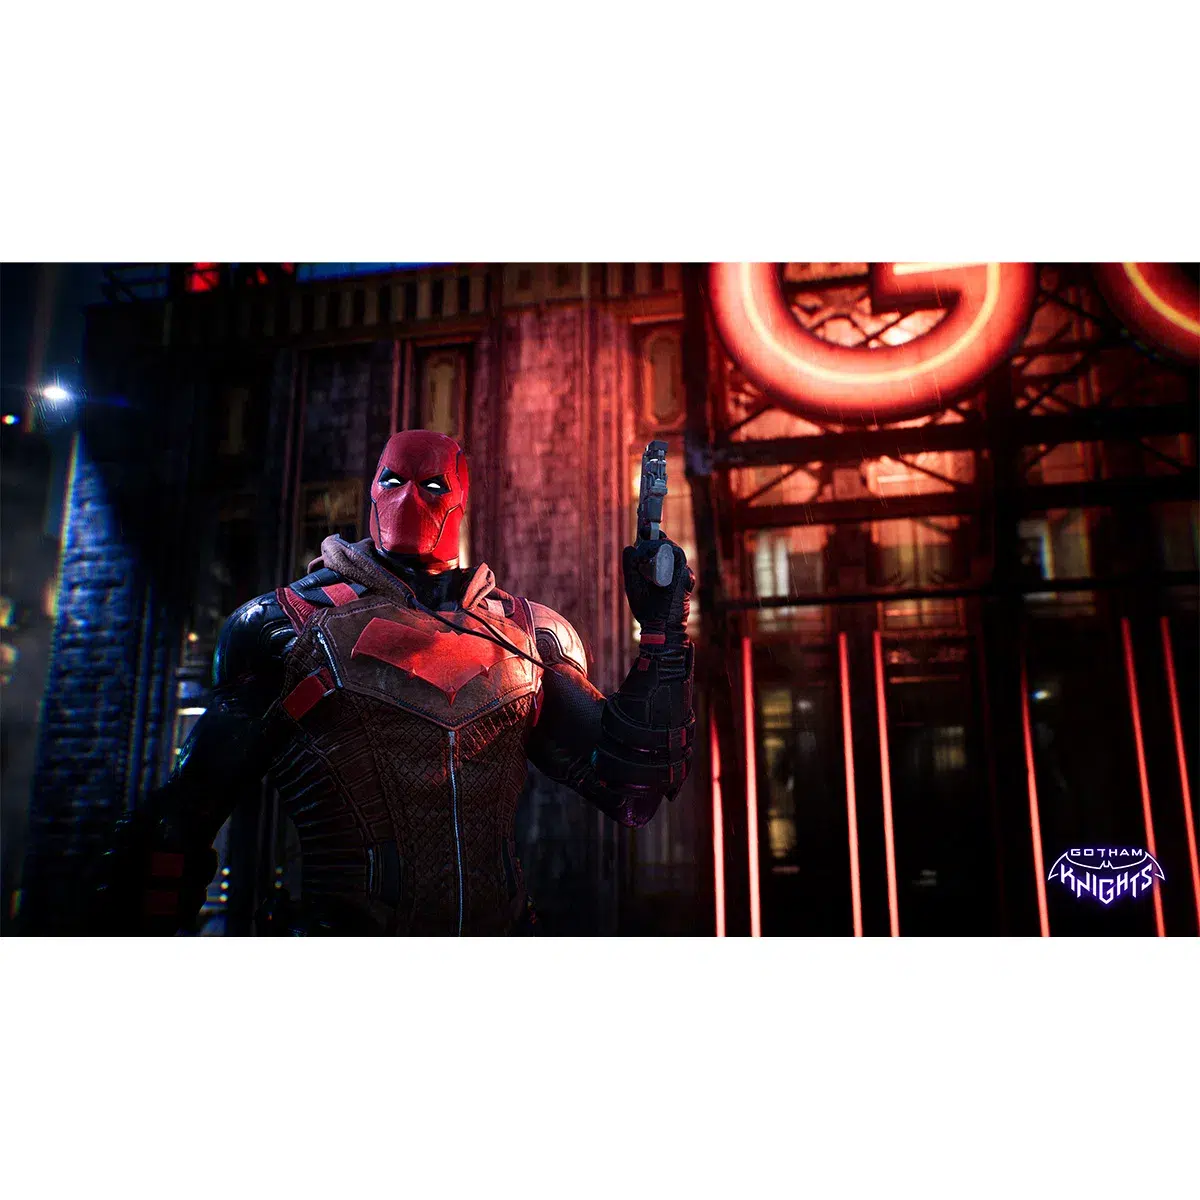 Gotham Knights Collector's Edition (Xbox Series X) Image 4